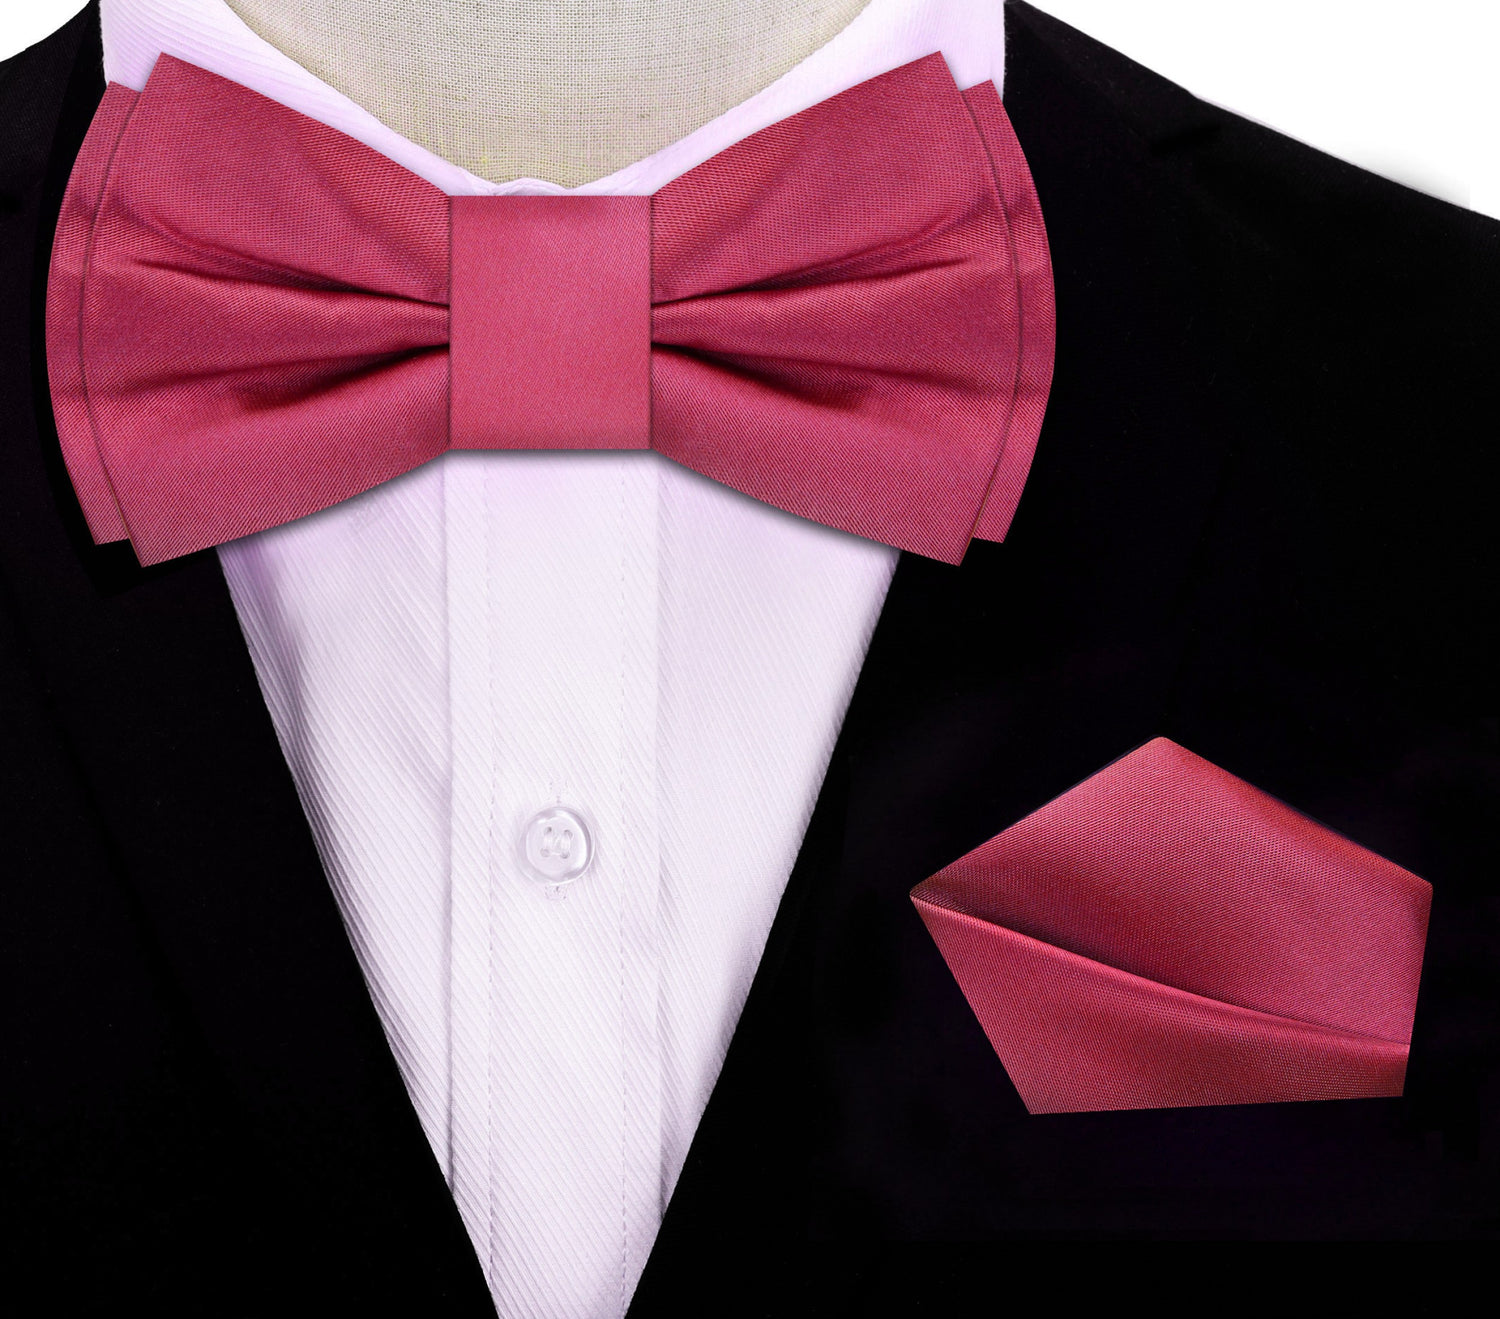 Raspberry Bow Tie with Green and Pocket Square on Suit